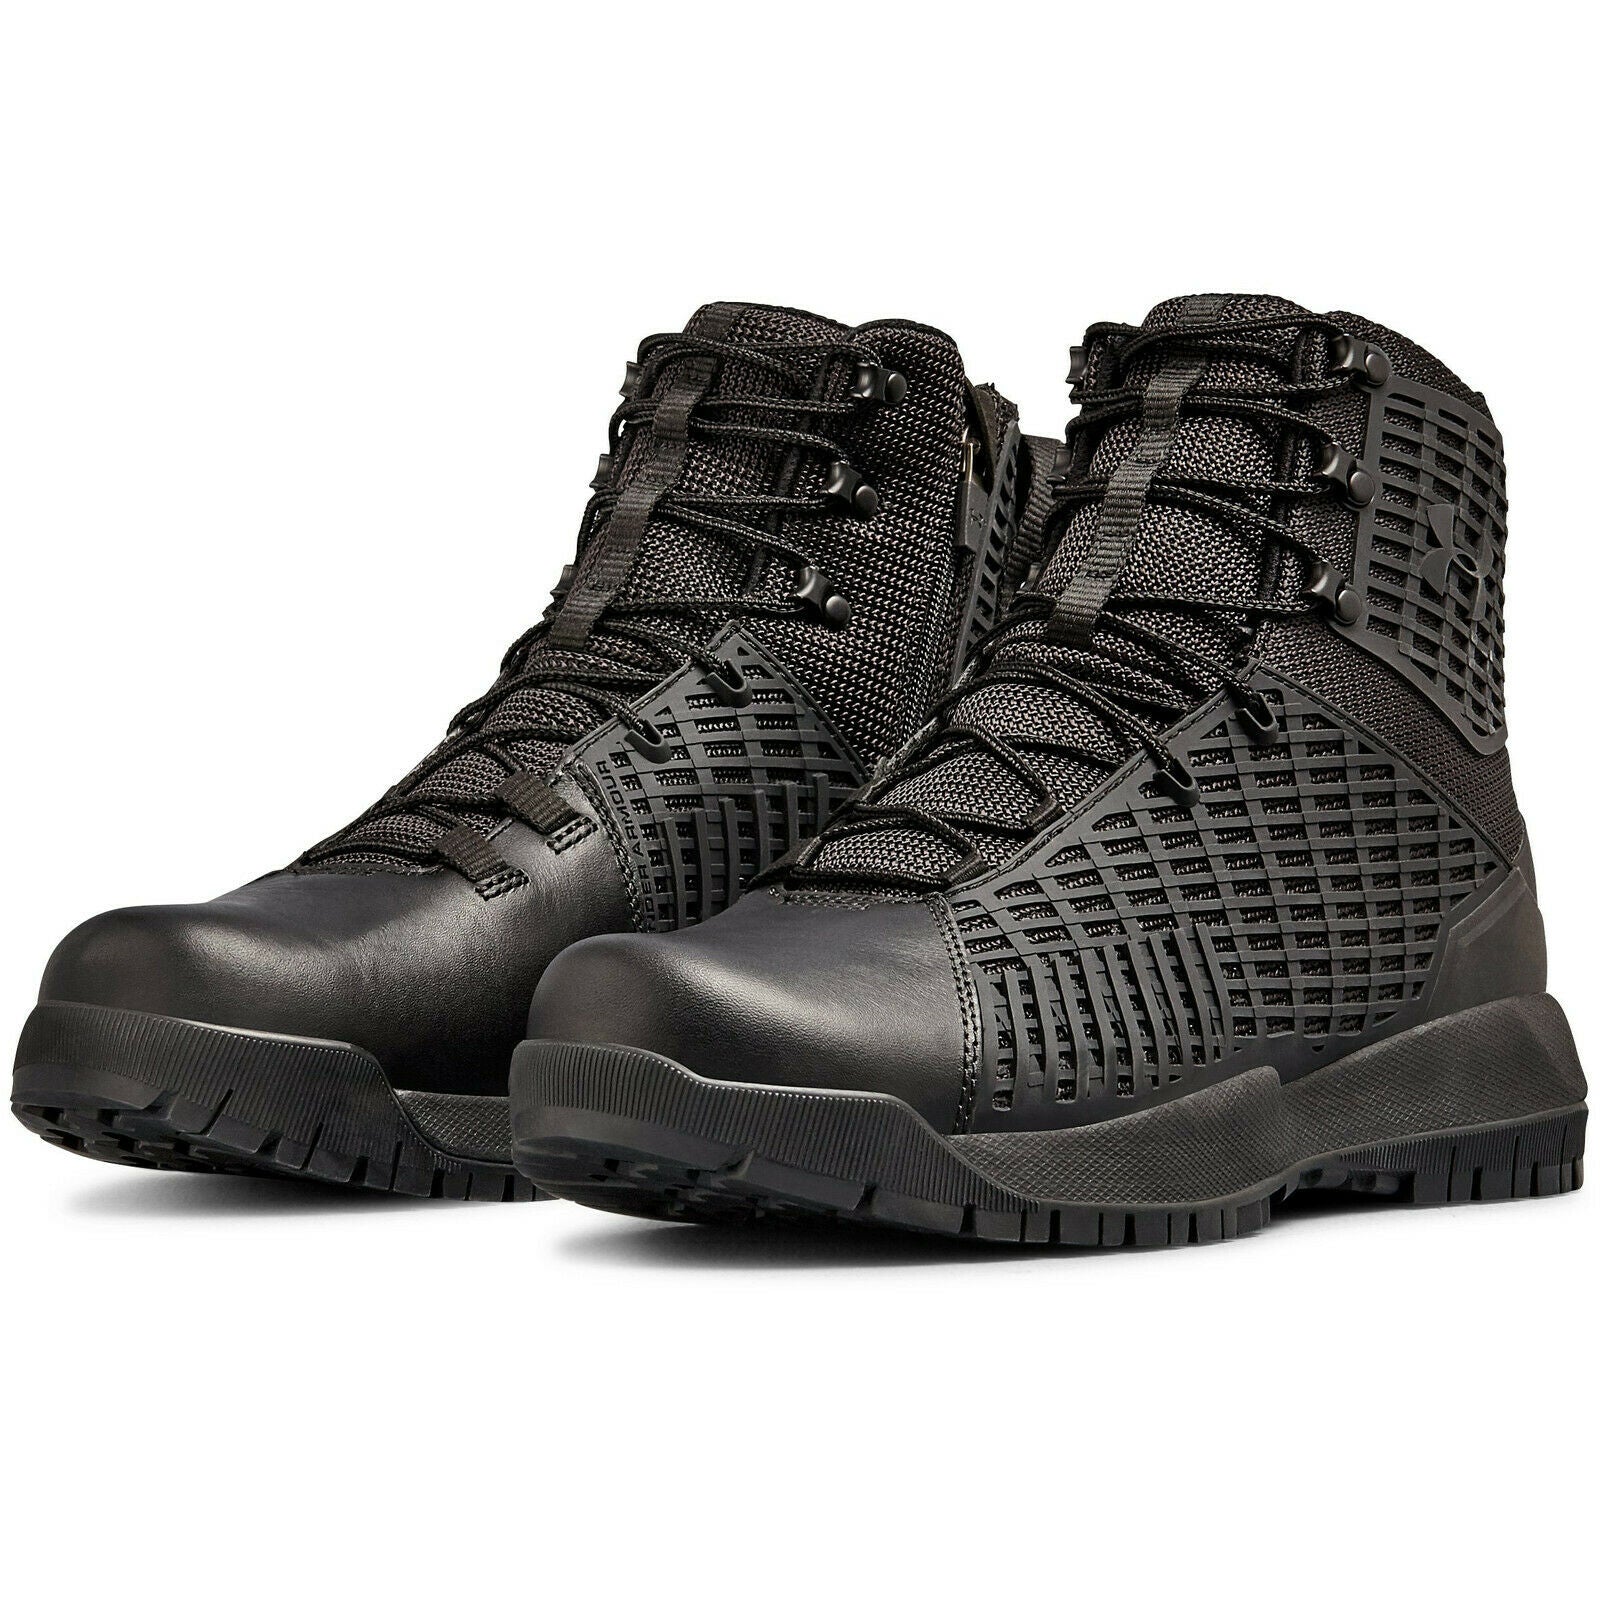 UA Stryker Side-Zip Boot - Under Armour Men's Tactical Boots in